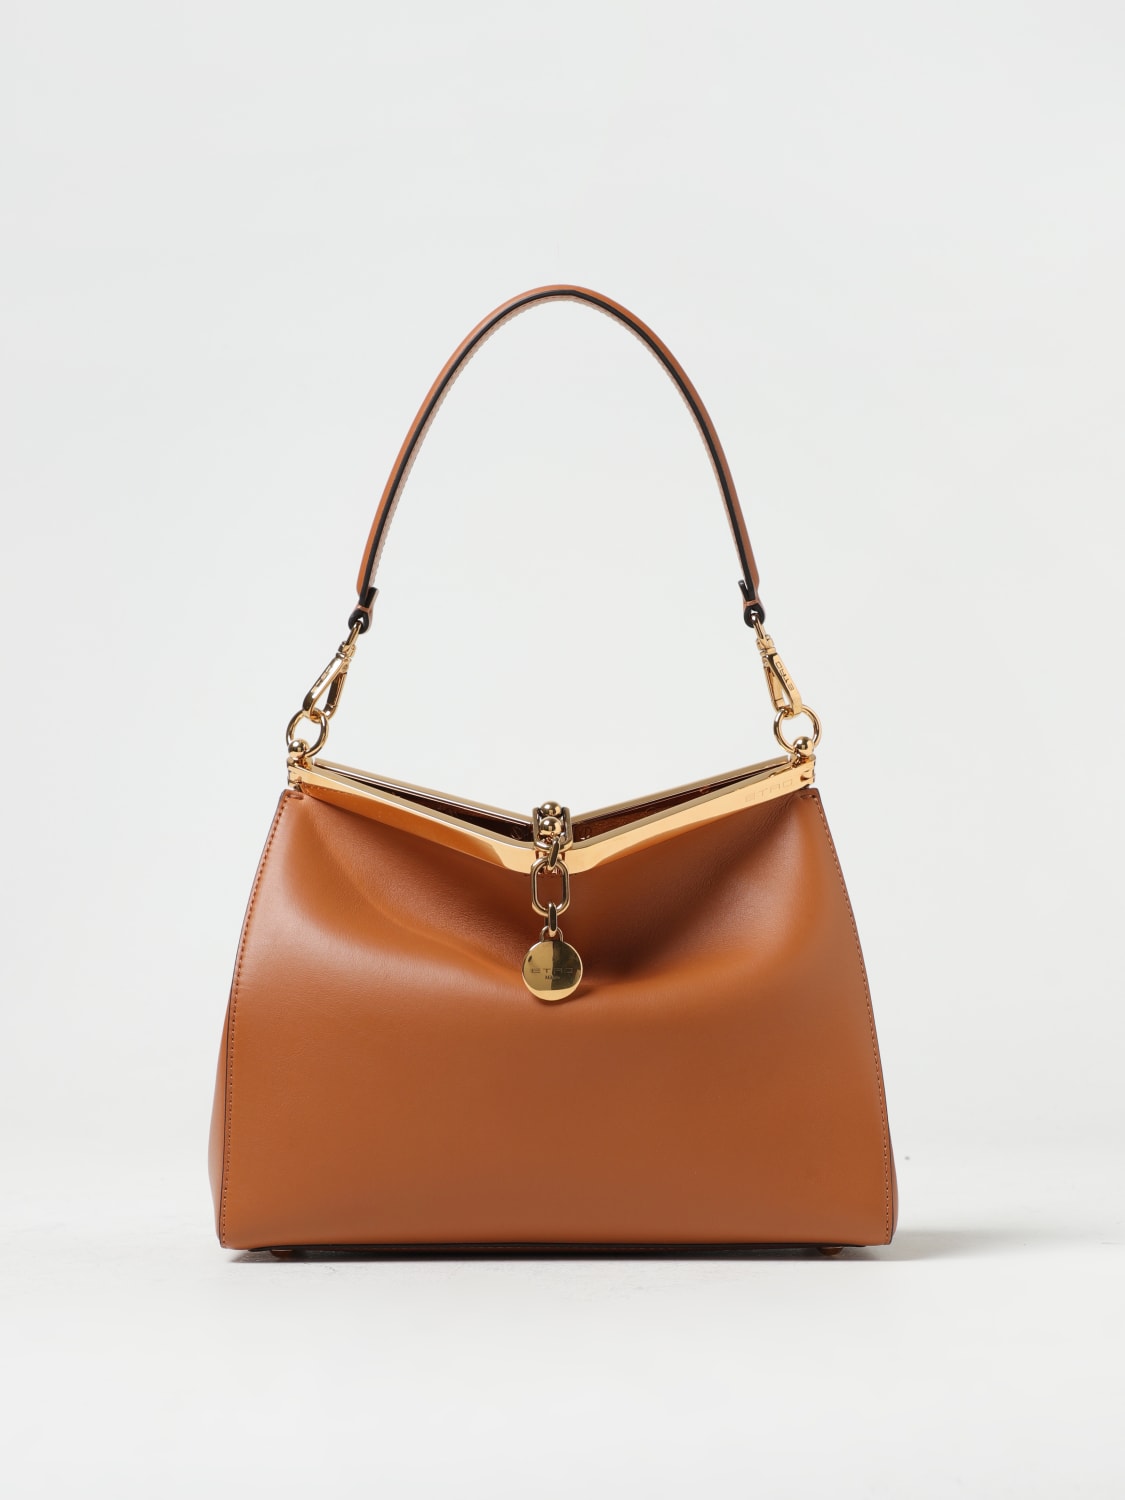 Etro Vela Bag in Leather with Logo Charm